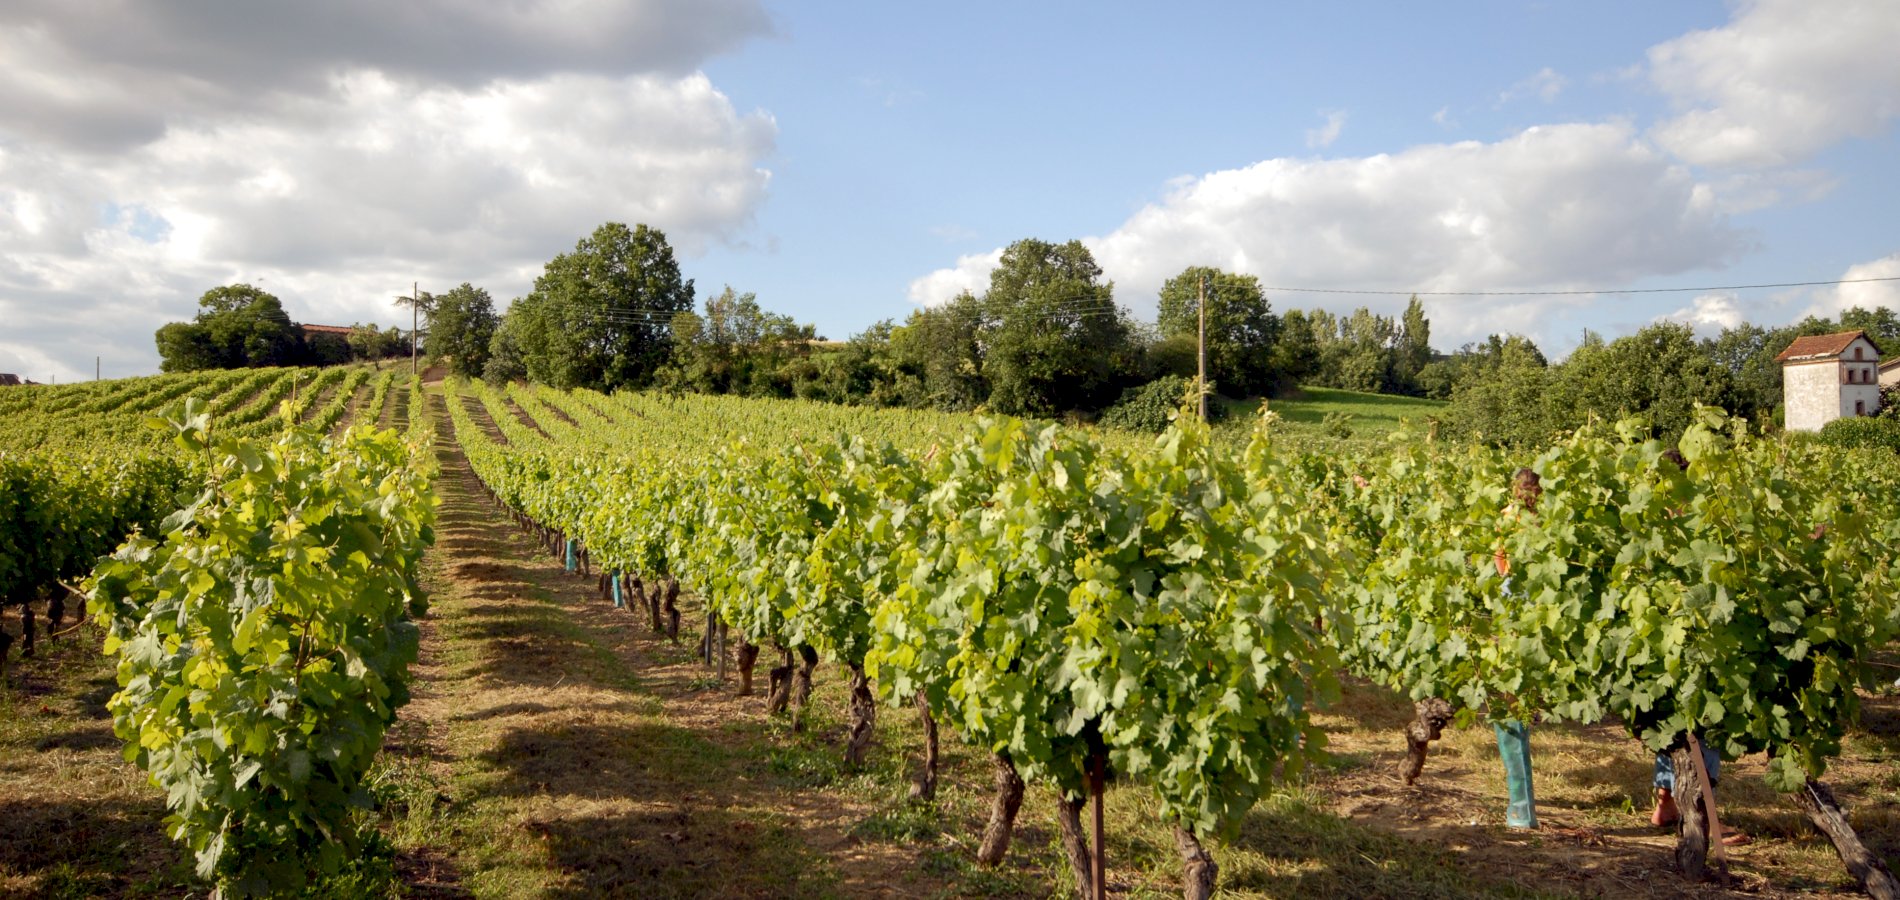 Ophorus Tours - A Private Gaillac Wine Tour Half Day Trip From Toulouse